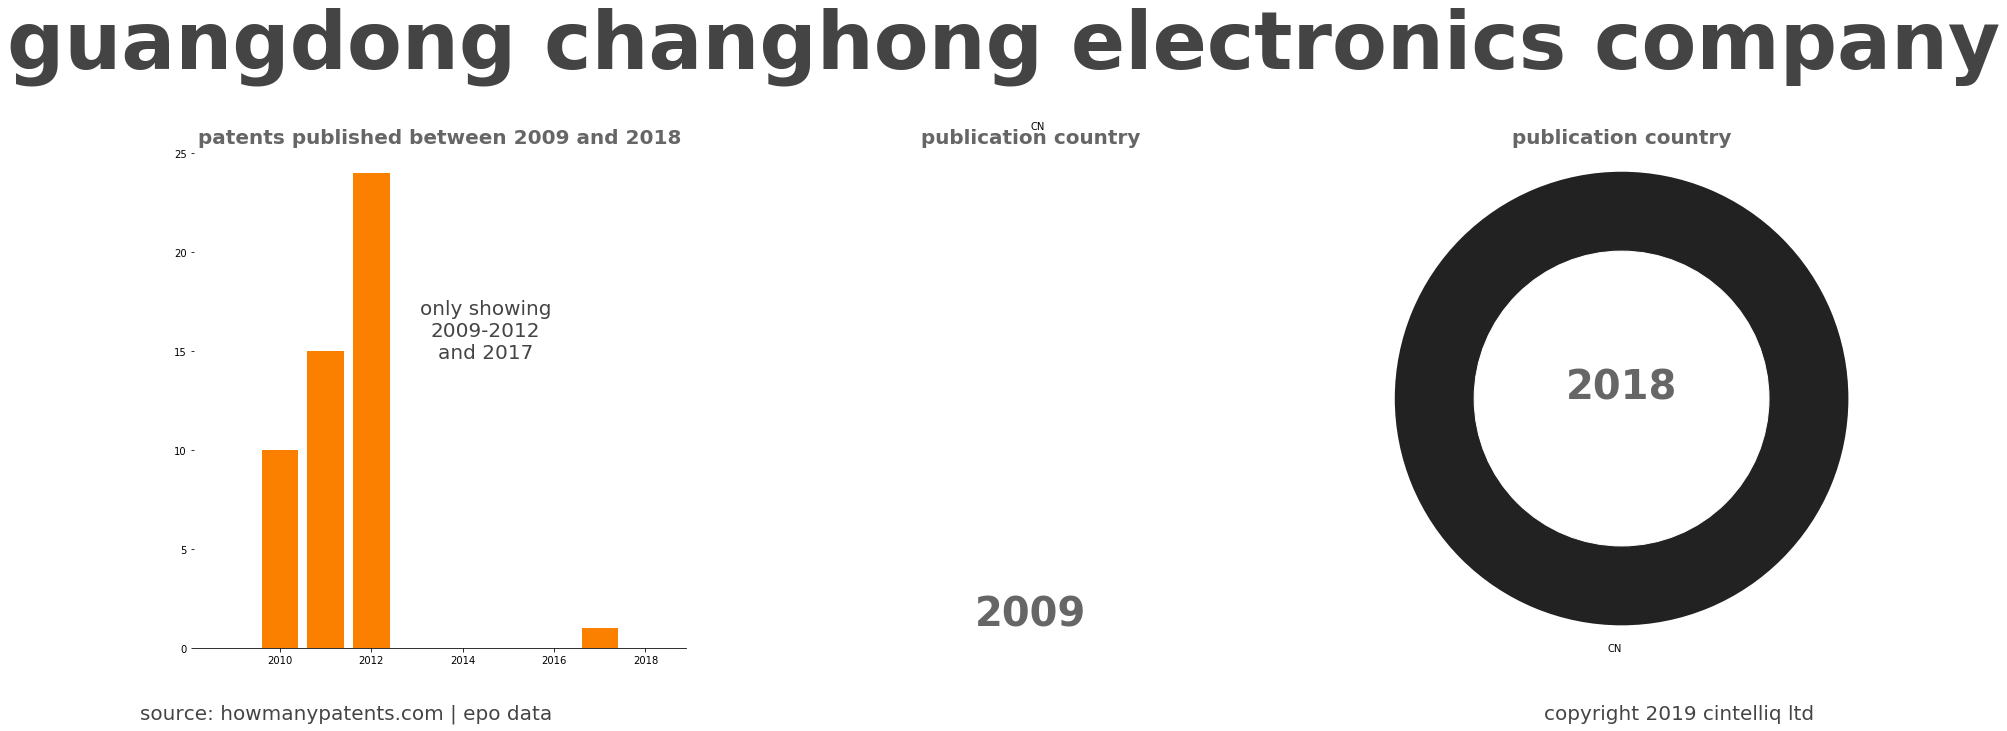 summary of patents for Guangdong Changhong Electronics Company